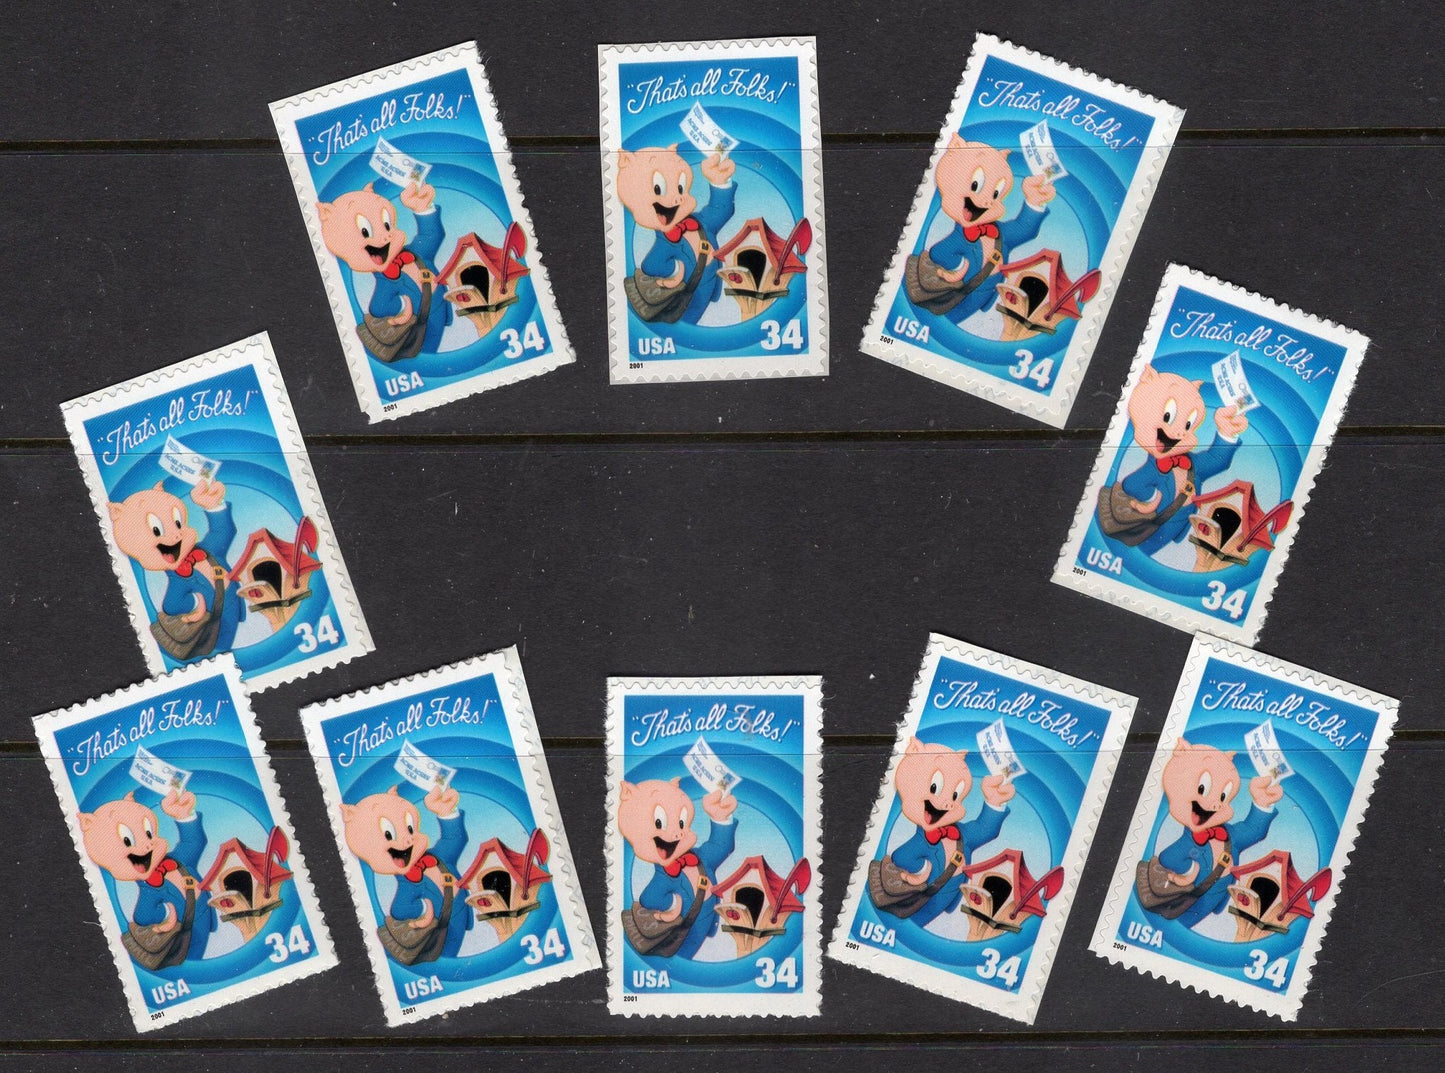 10 PORKY PIG LOONEY Tunes Stamps Mailbox Bright, Bright Unused USA Postage Stamps - Issued in 2001 - s3534 -